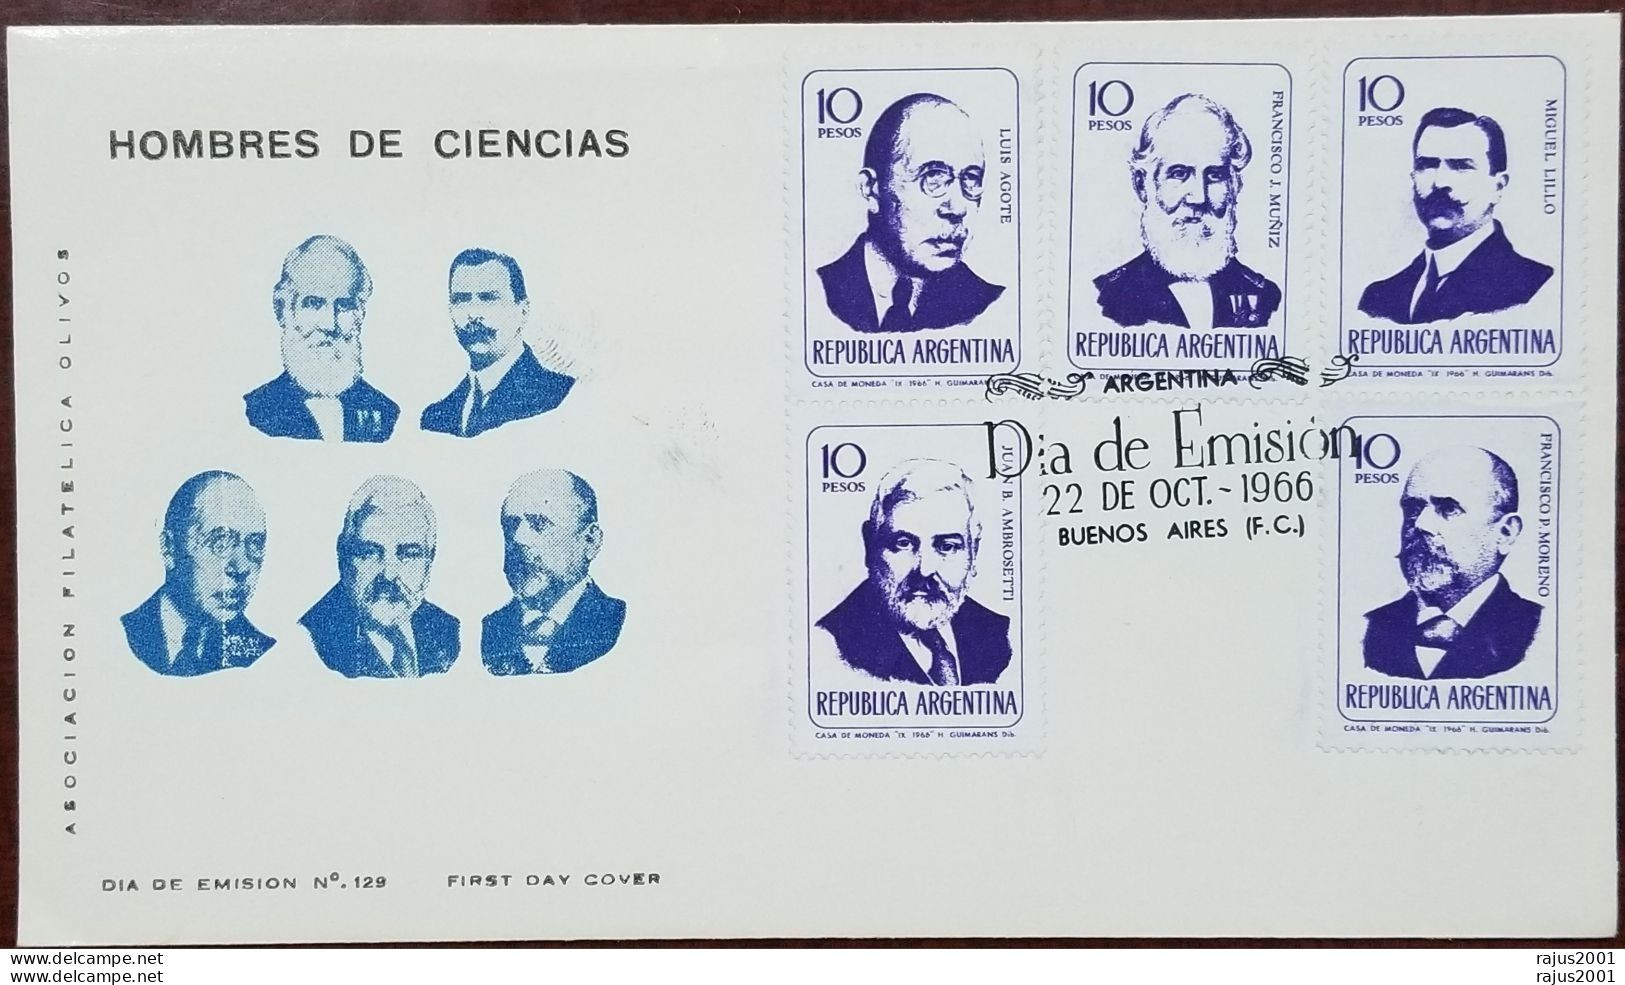 Heroes Of Sciences And Medicine, Physician Medical Doctor Naturalist, Archaeologist, Explorer, Famous Personalities FDC - Physics